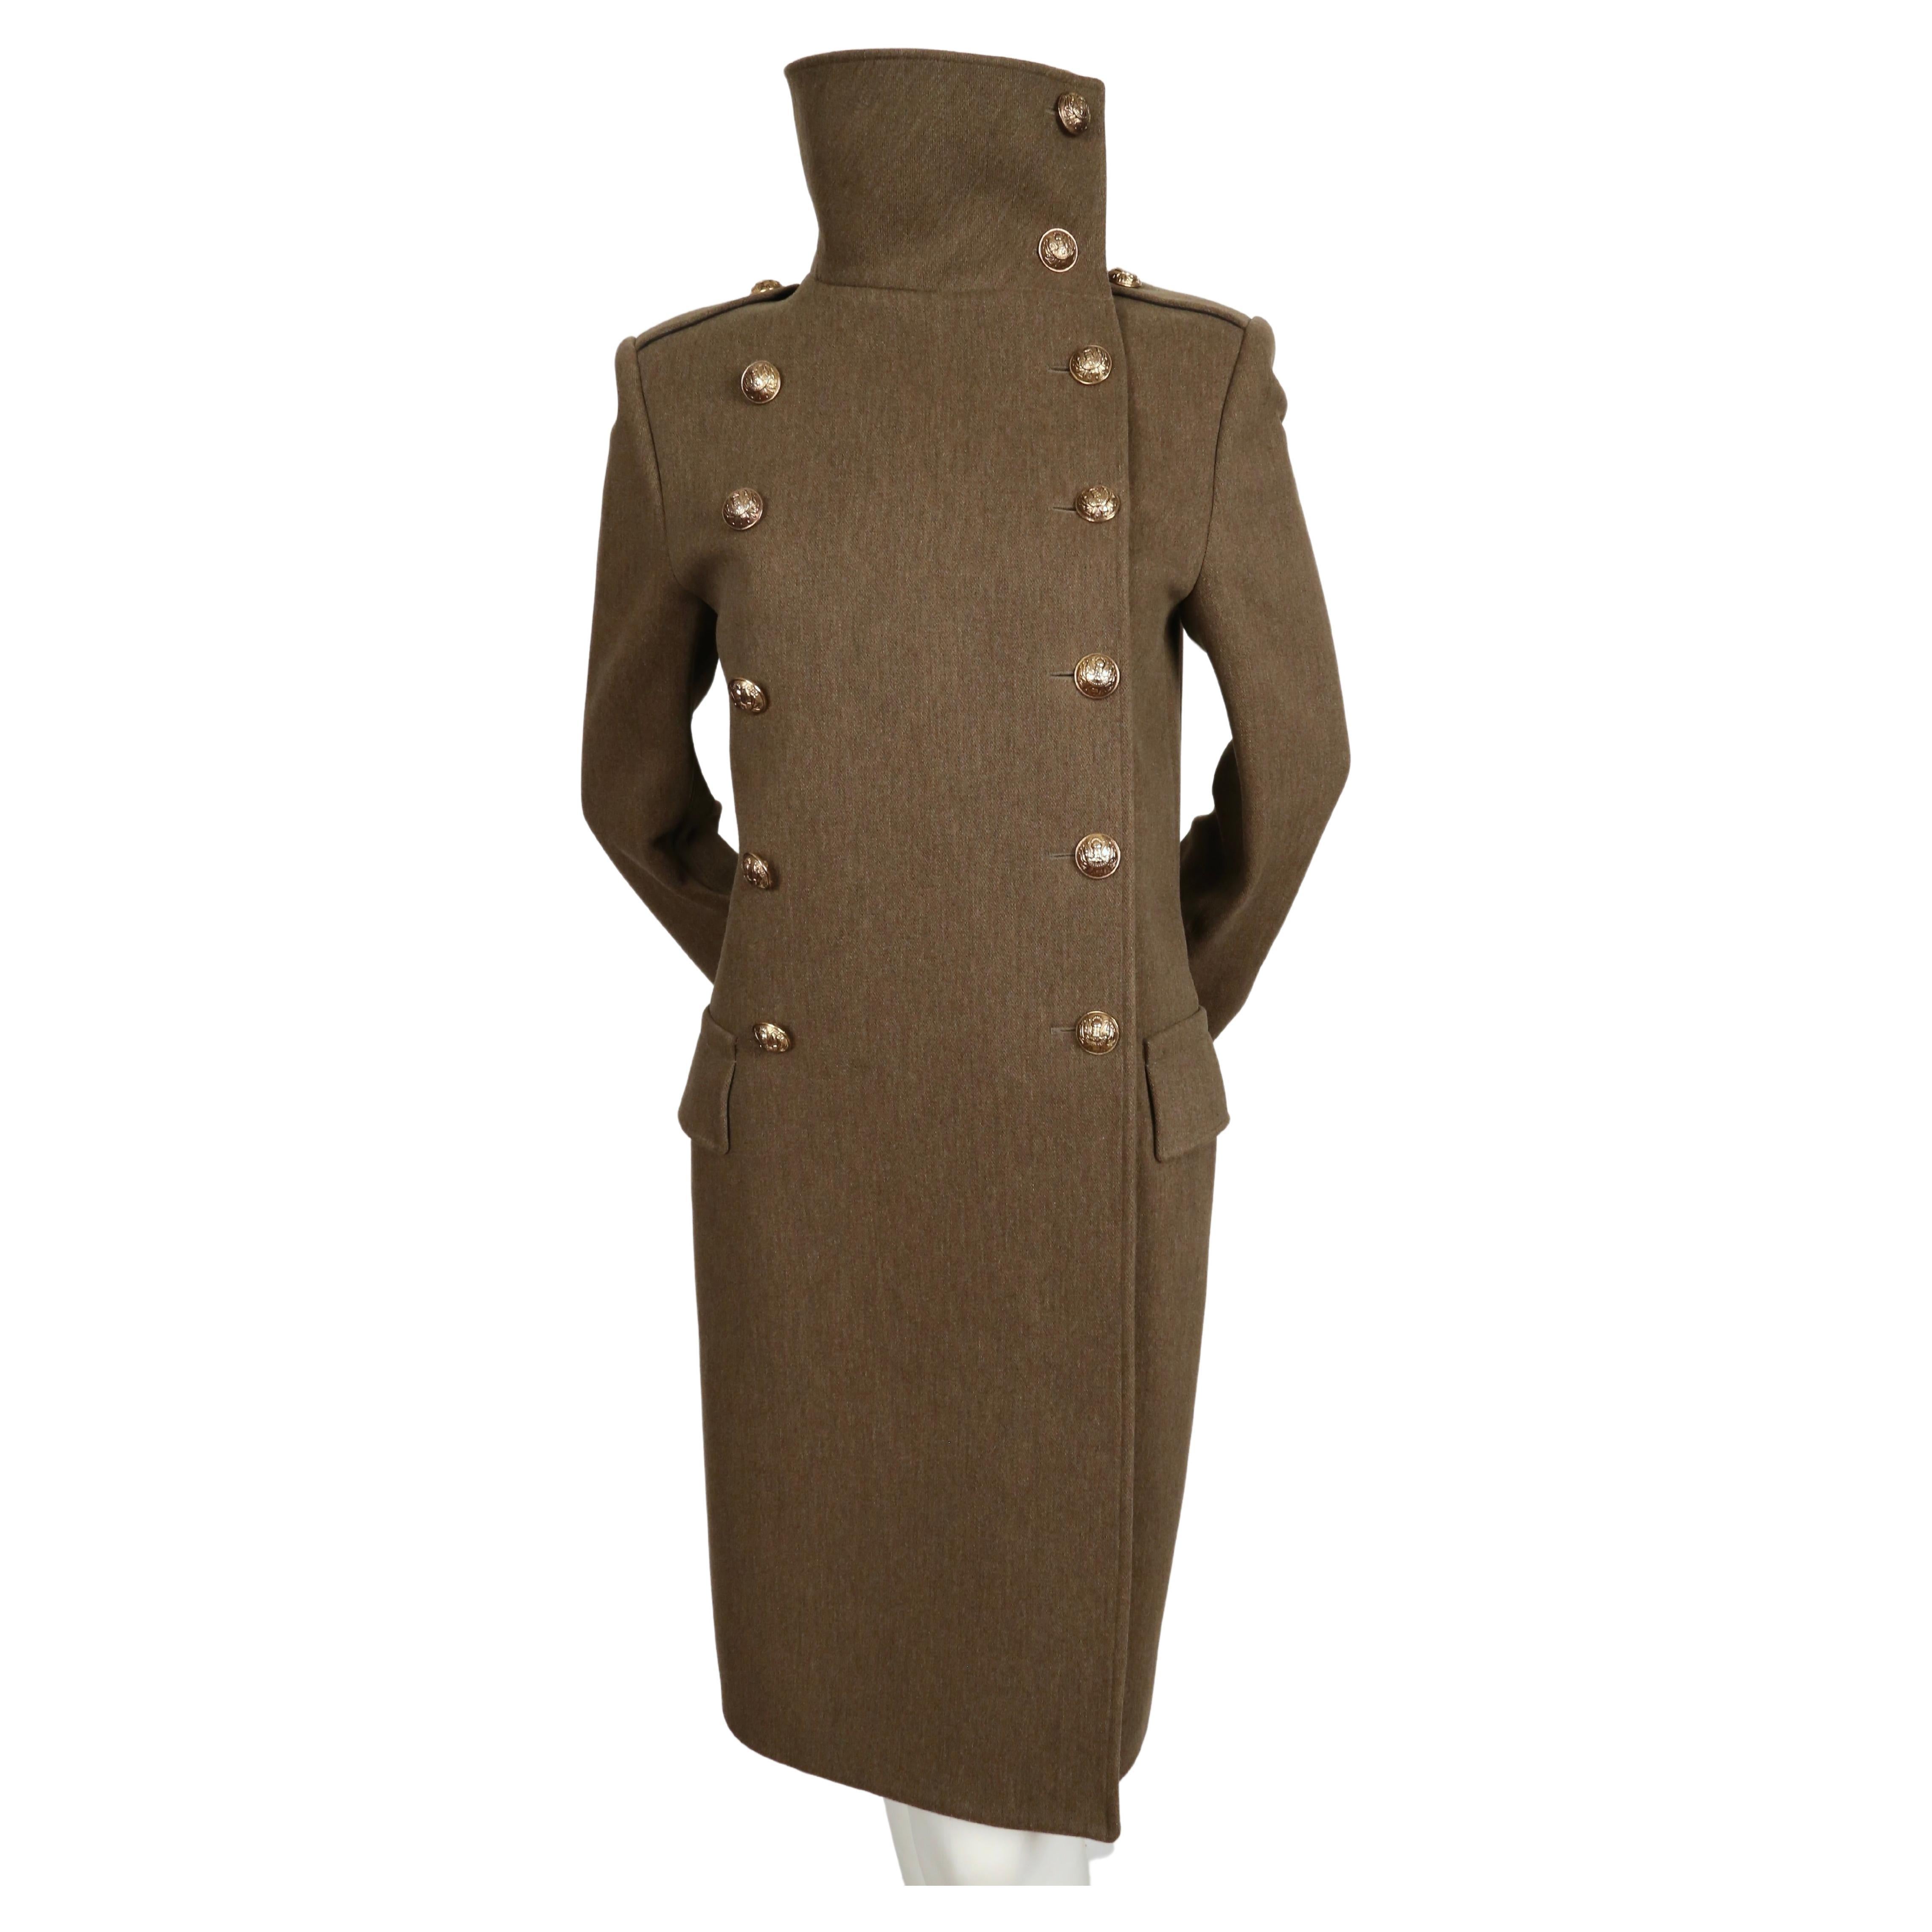 2011 BALMAIN olive green melton wool long military coat - new with tags In New Condition For Sale In San Fransisco, CA